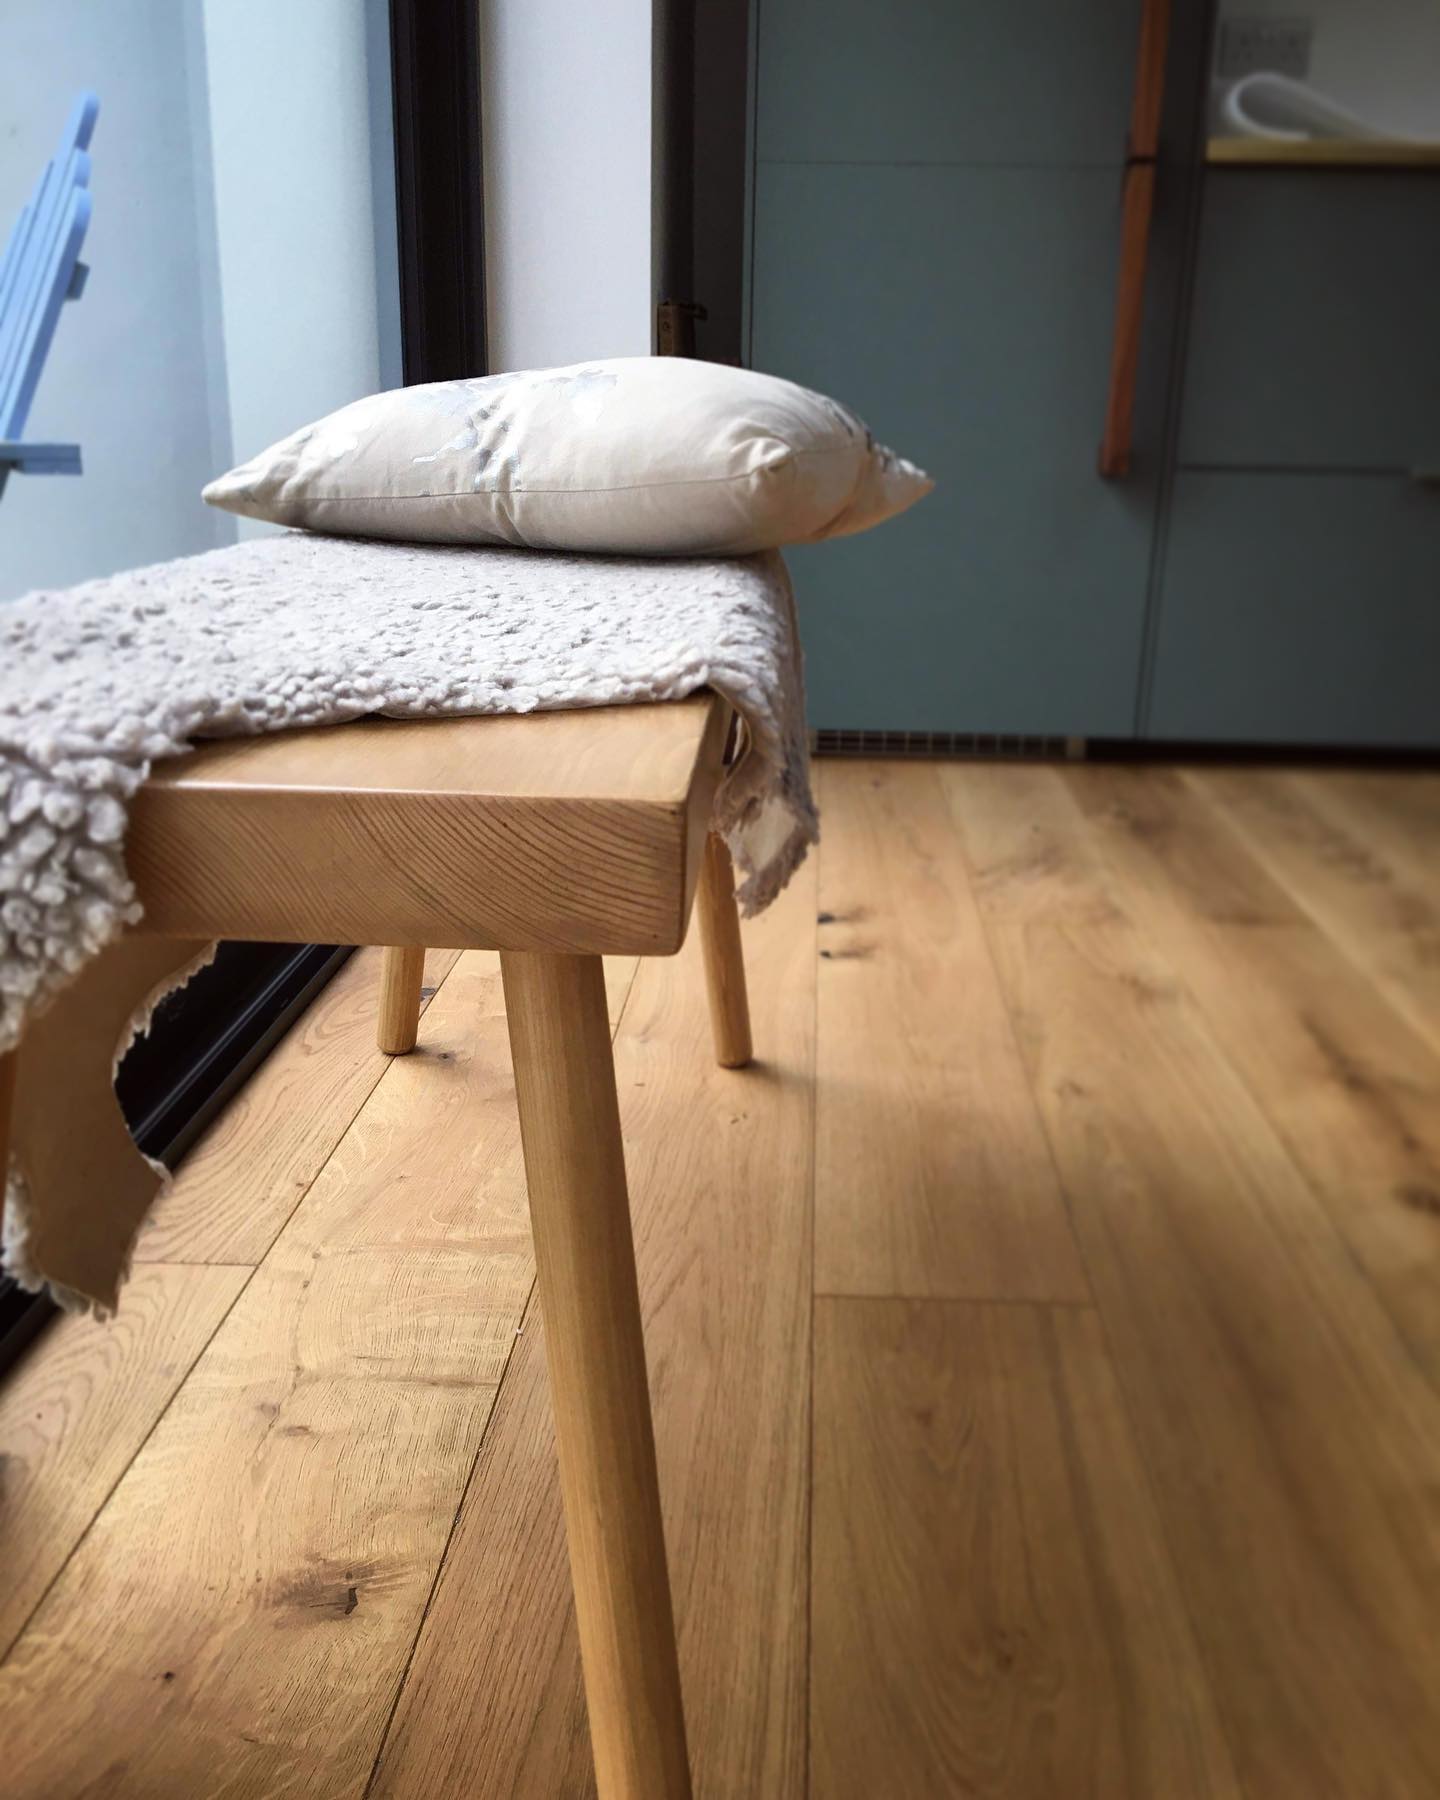 Another lovely commission to work on! It looks so fabulous in this beautiful kitchen! ....#handcrafted #homedecor #interiors #dreamkitchen #bench #oak #comfy #relax #home #frome #bespoke #gingerandtweed